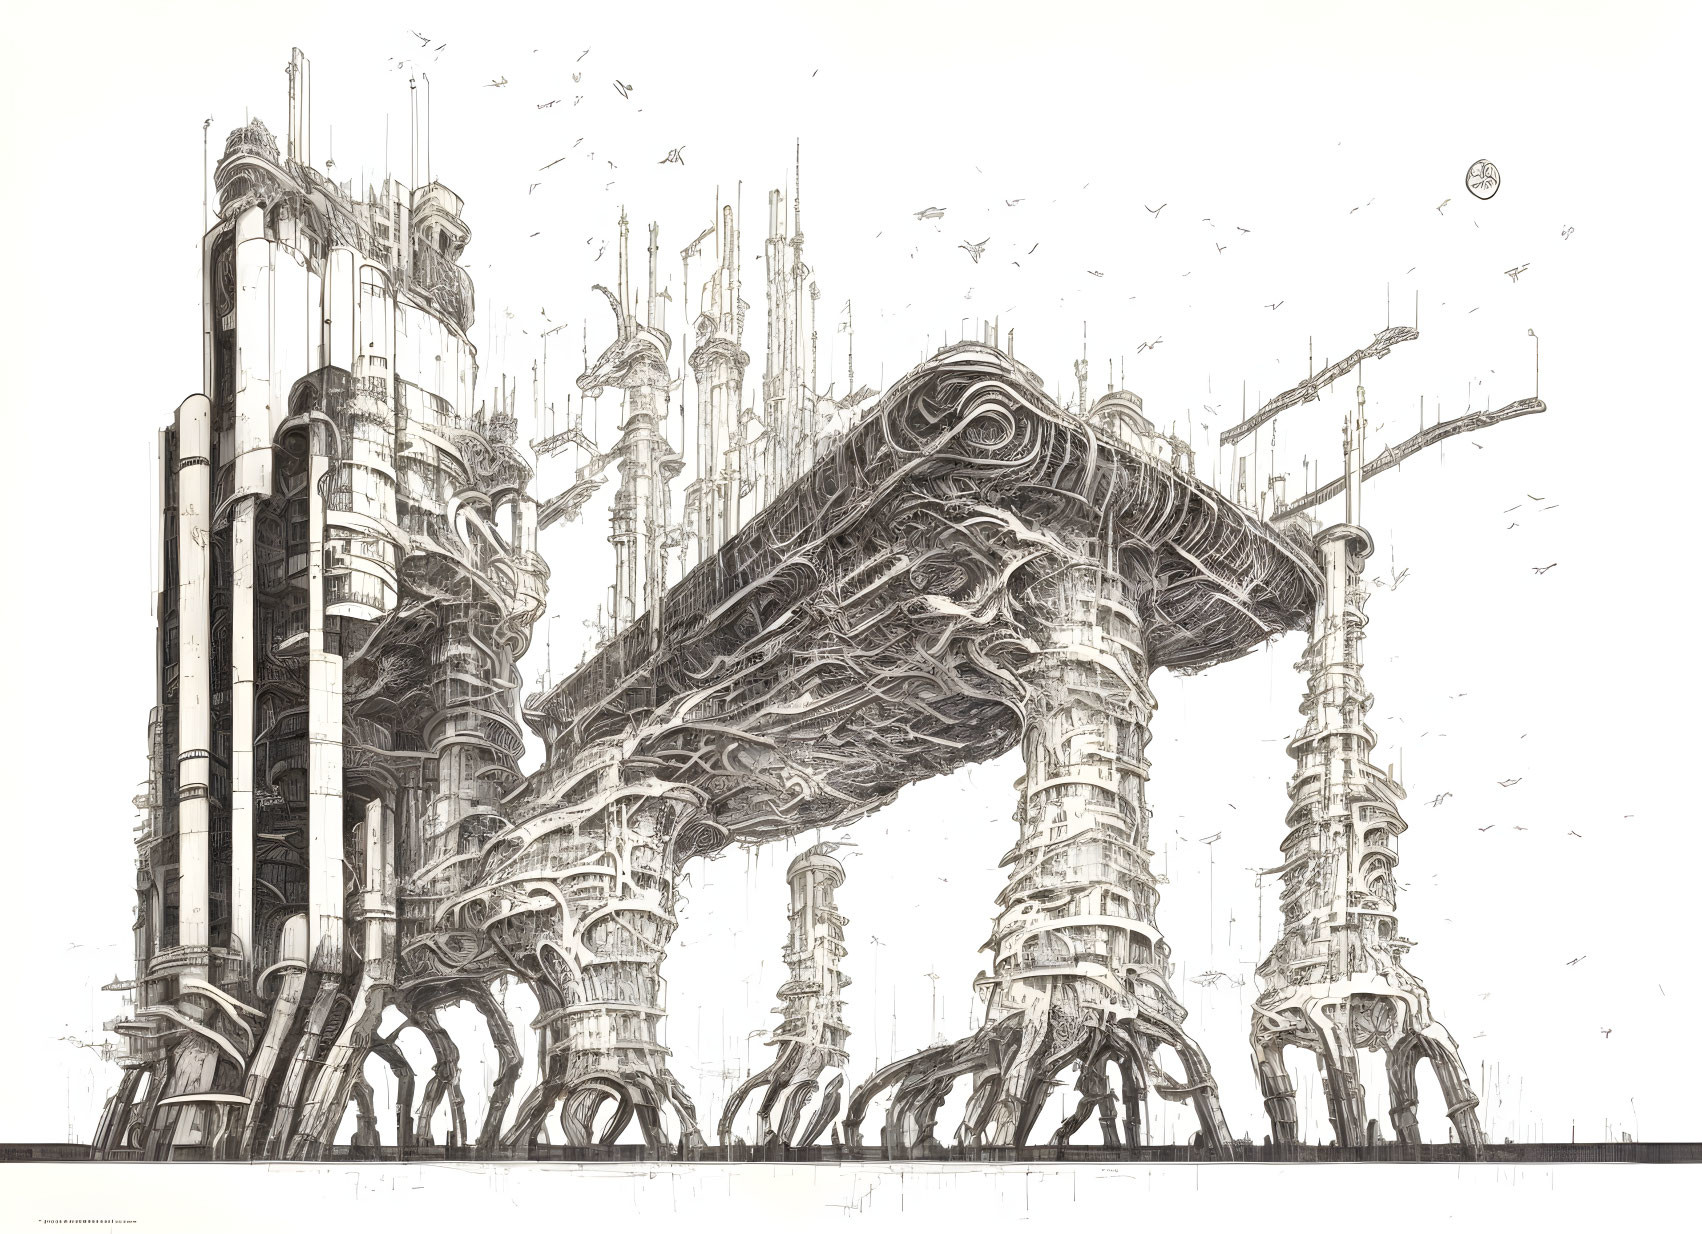 Monochromatic sketch of futuristic city with towering skyscrapers and intricate architectural details